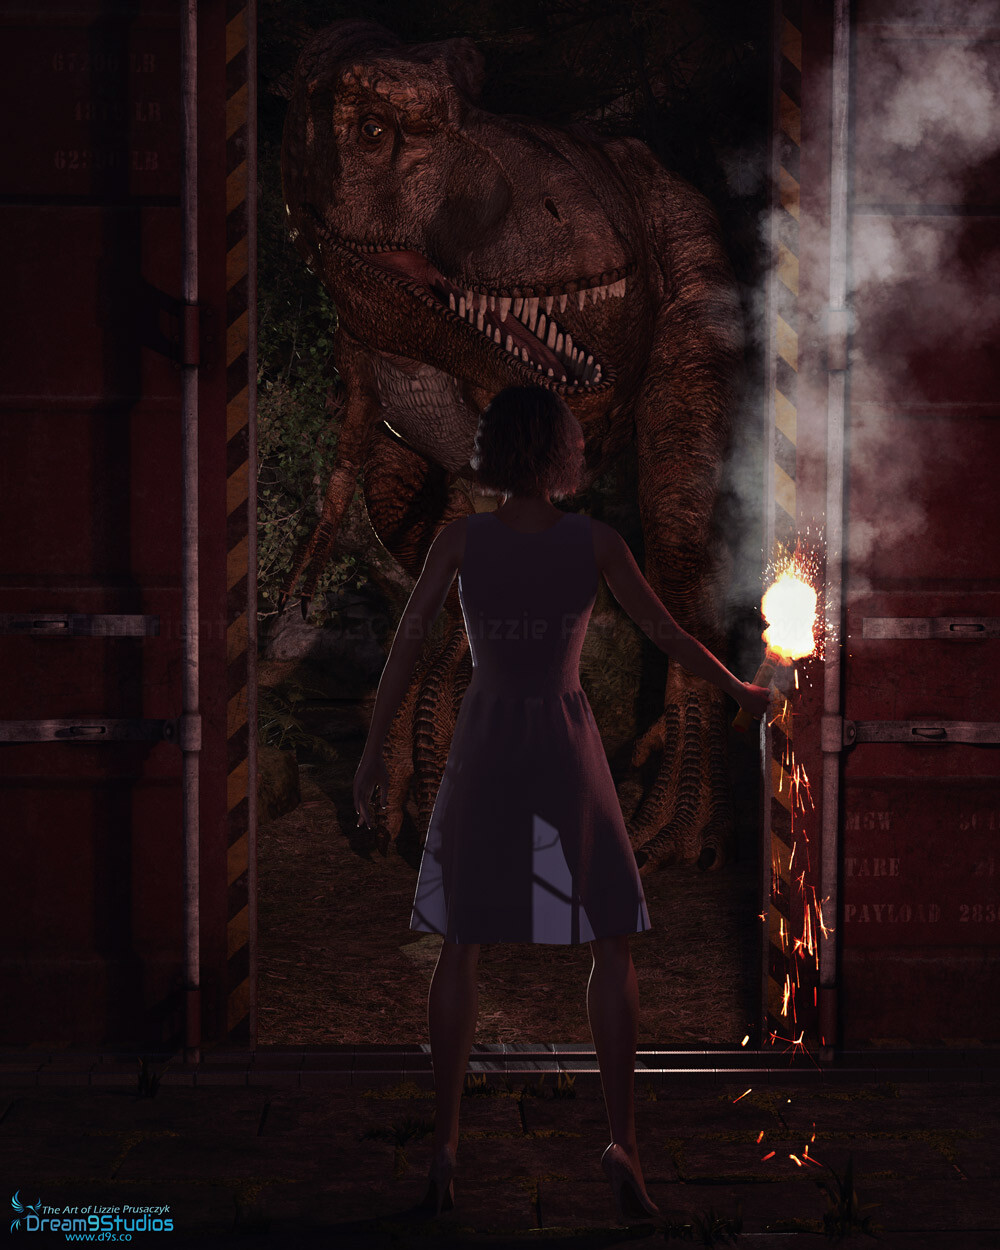 As she bravely stands at the gates of the paddock with flare in hand to grab the attention of the giant T-Rex, Claire gets ready to run and lead the beast into battle.